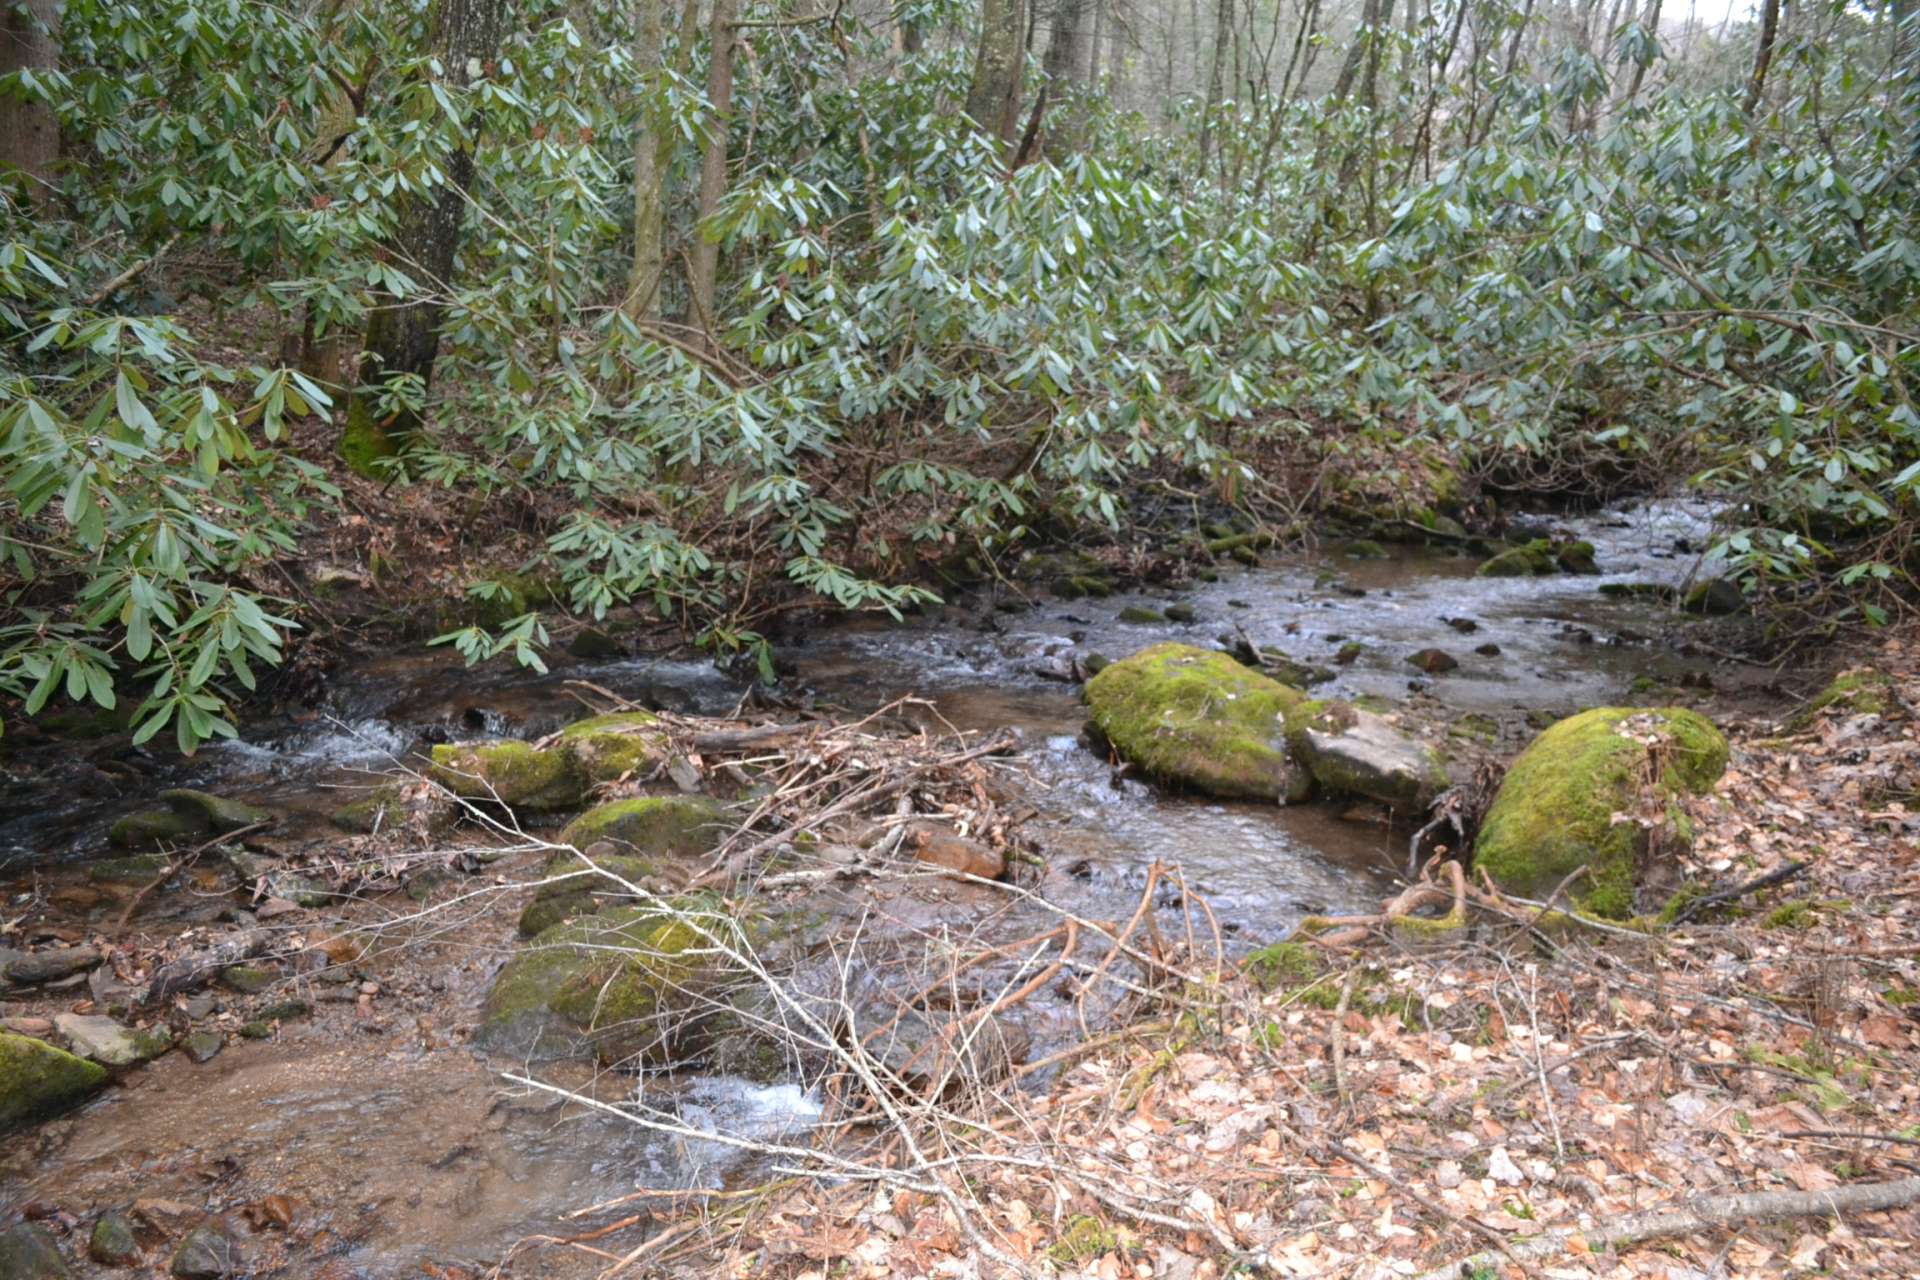 This mountain creek can be enjoyed along the back of the property.